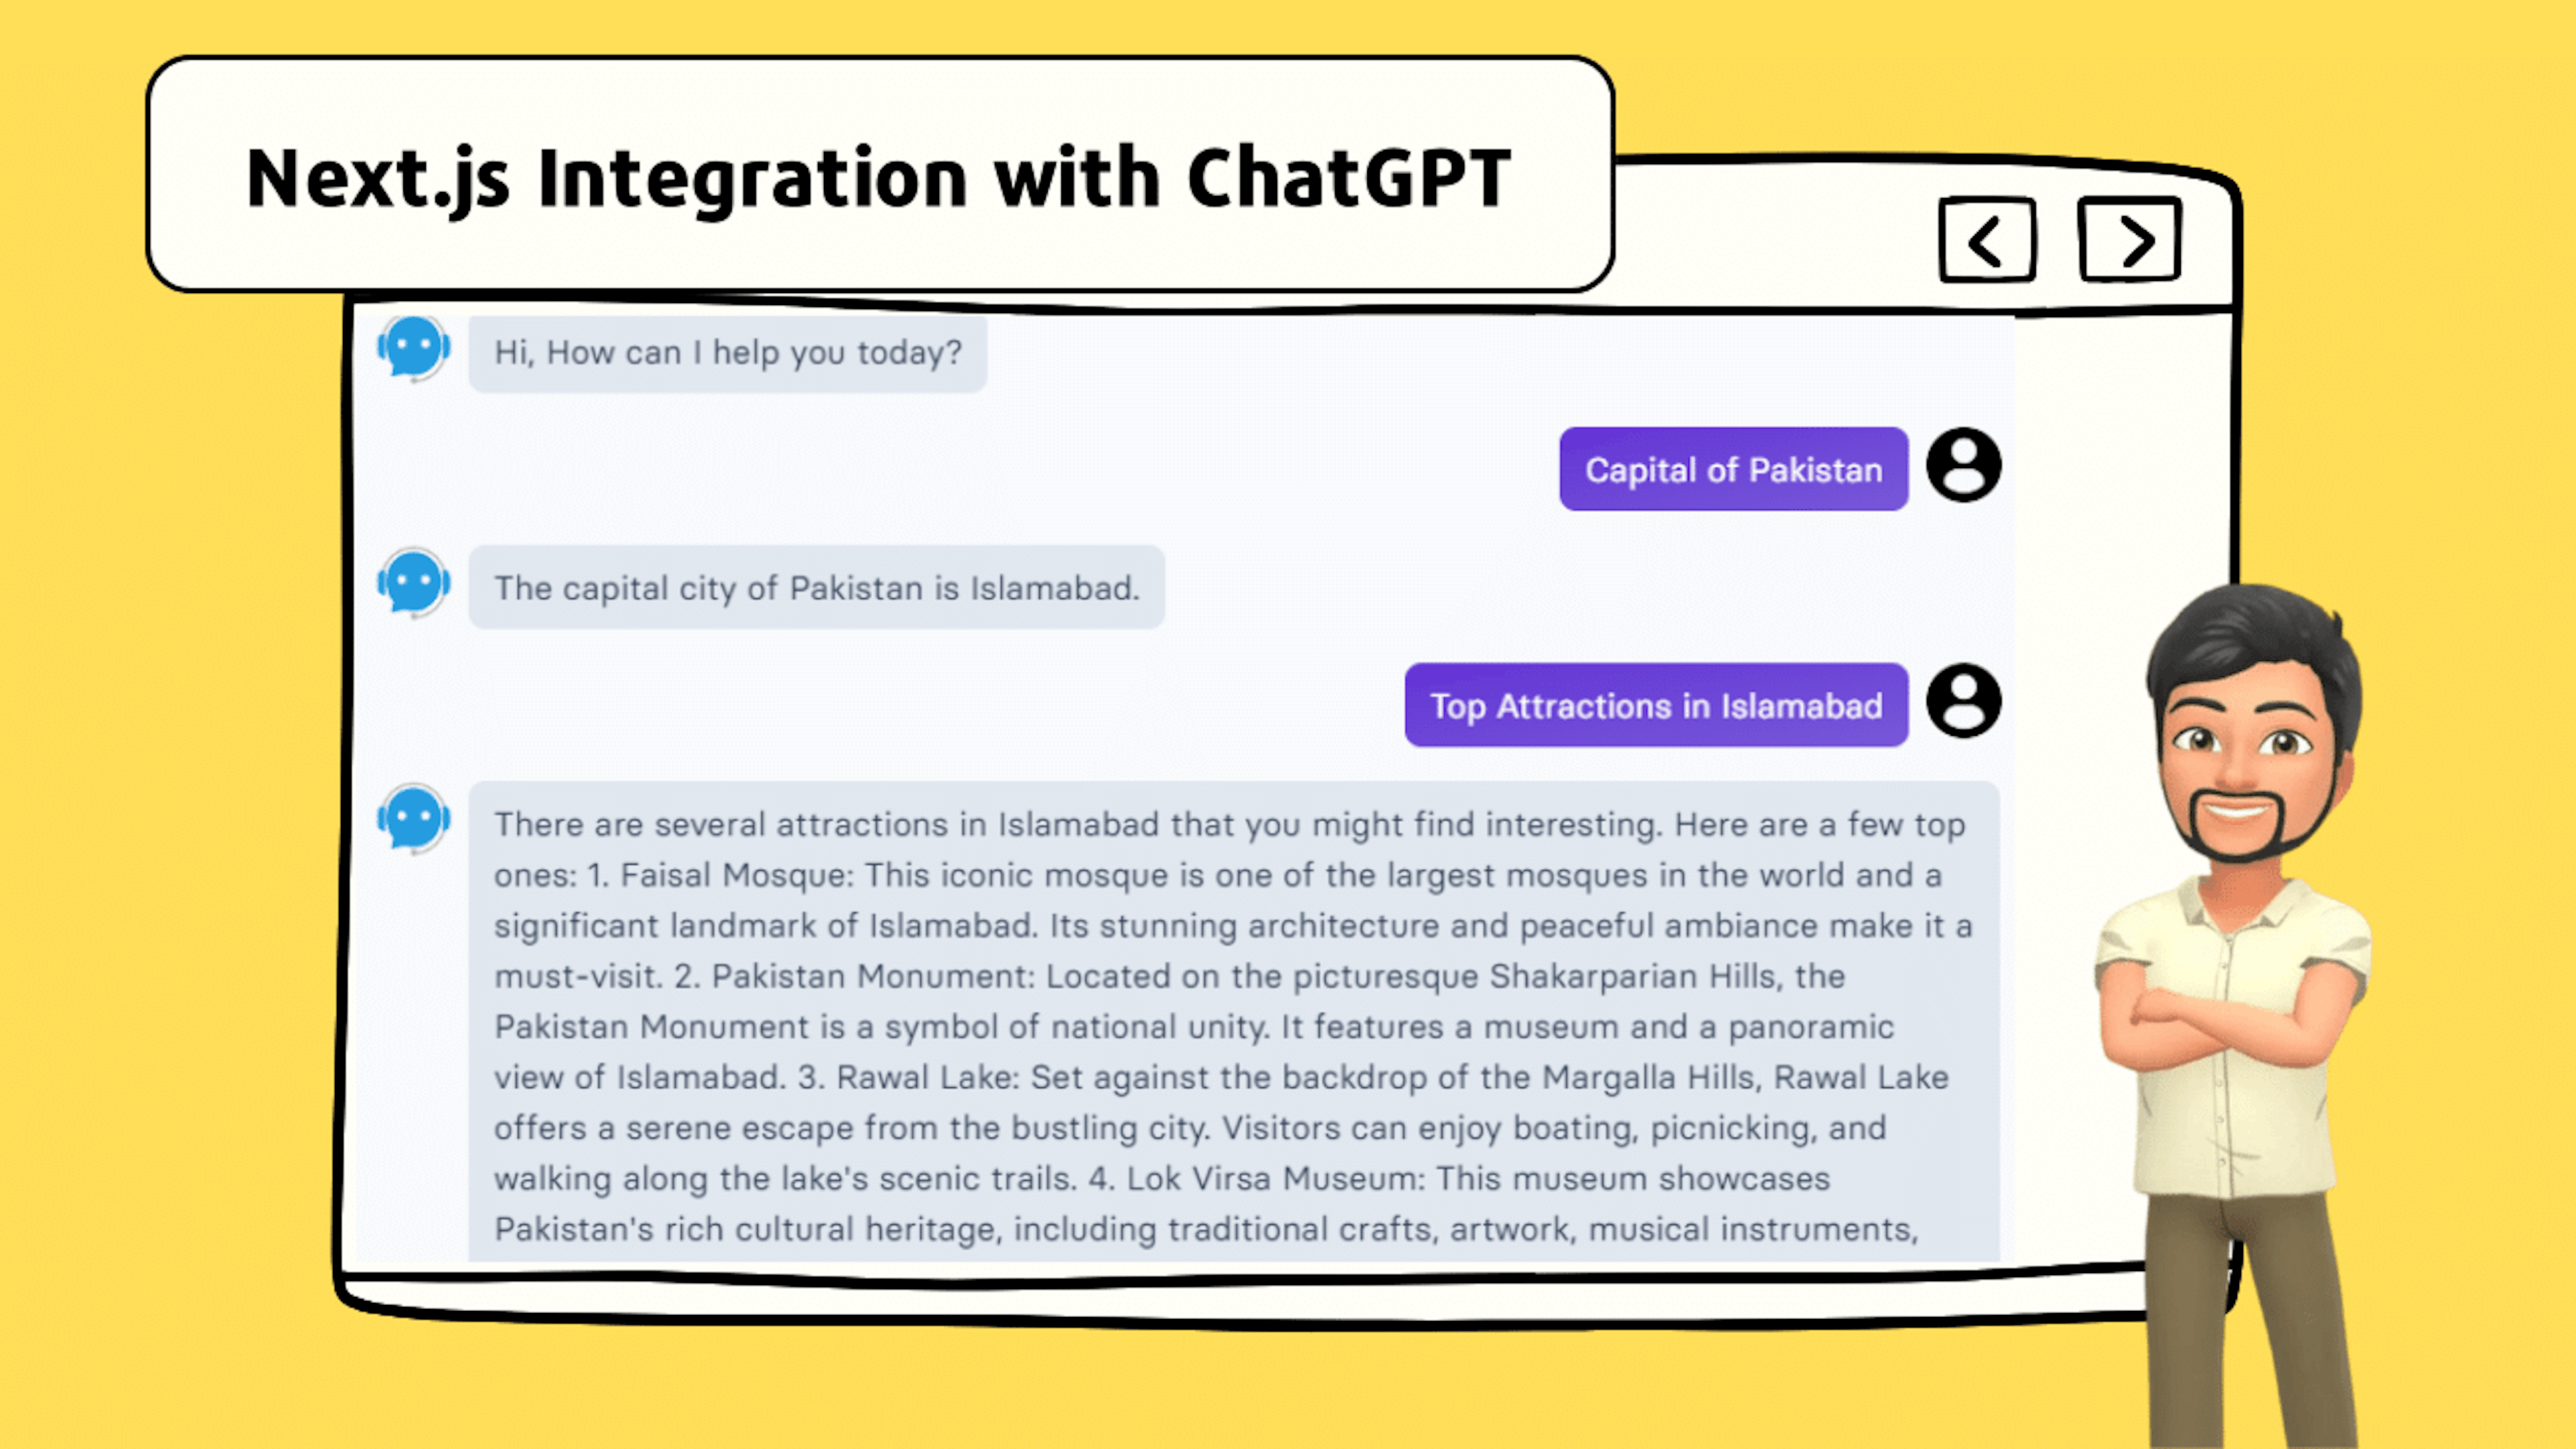 Next.js Integration with the ChatGPT